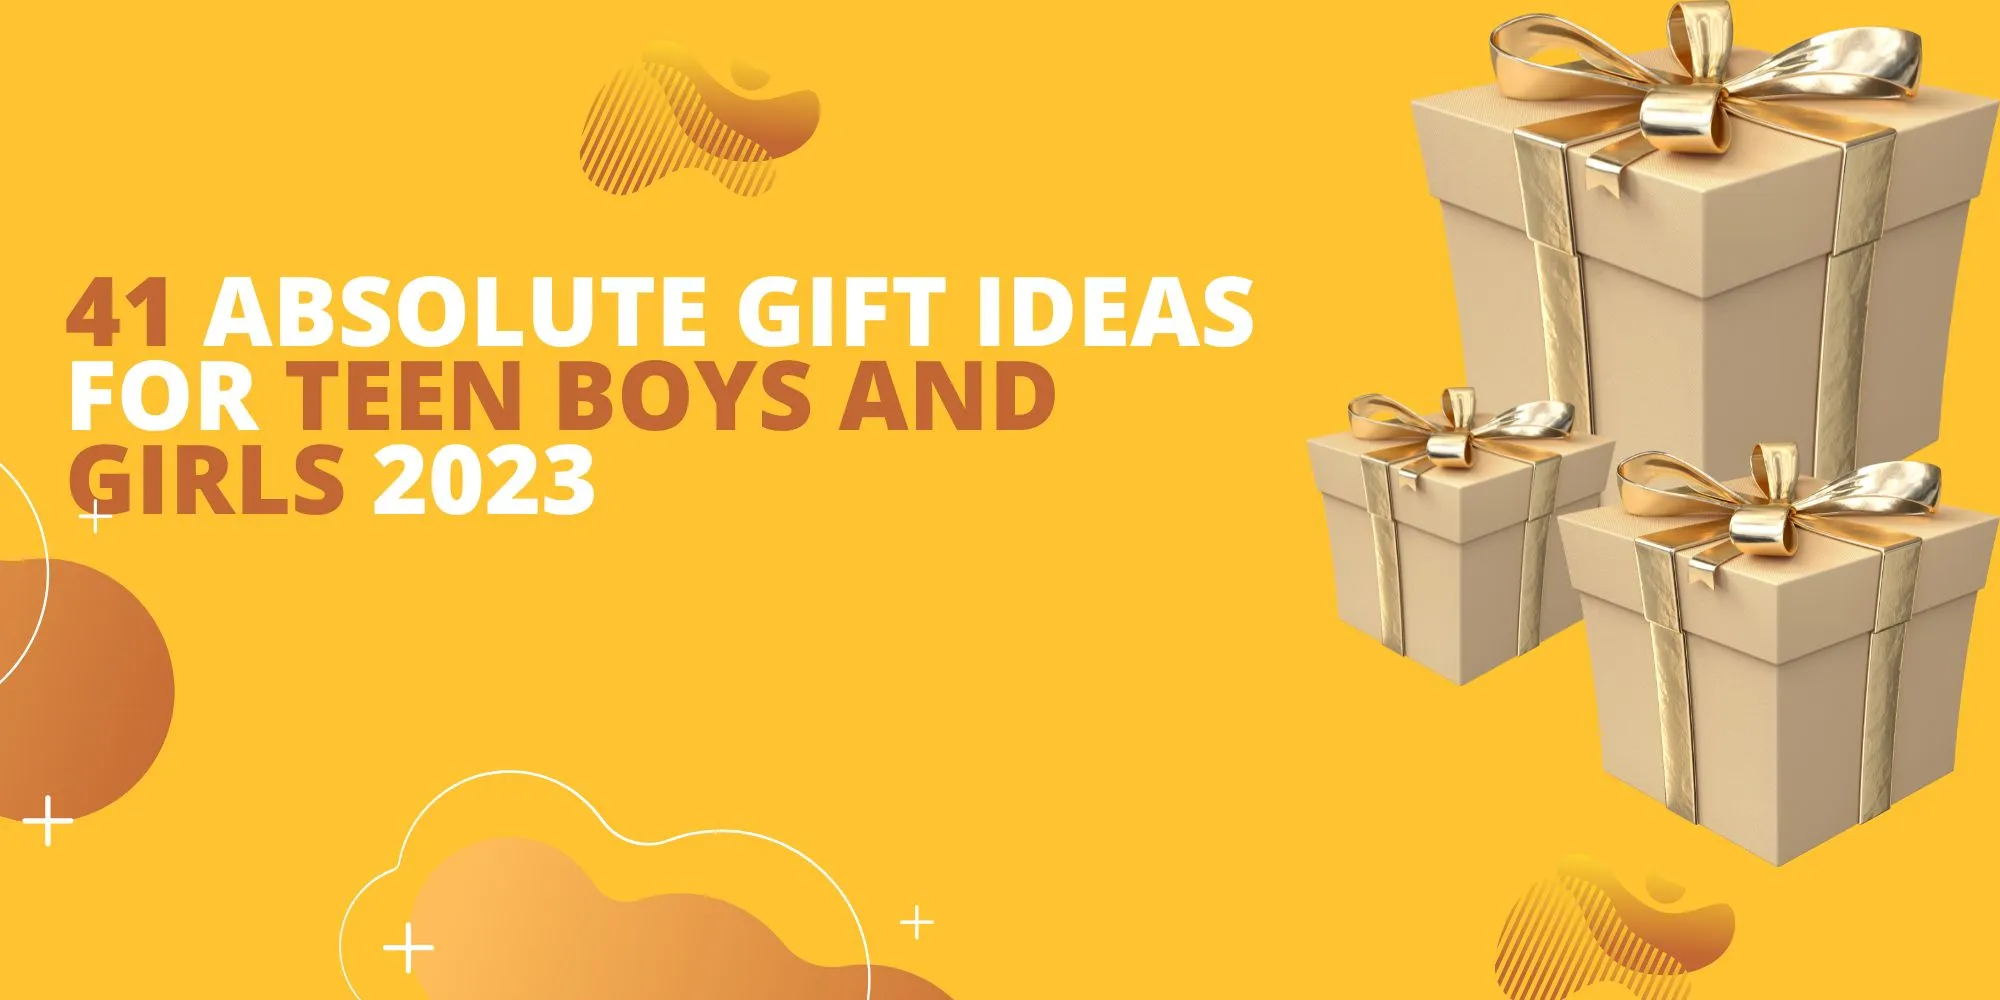 41 Absolute Gift Ideas For Teen Boys and Girls 2023